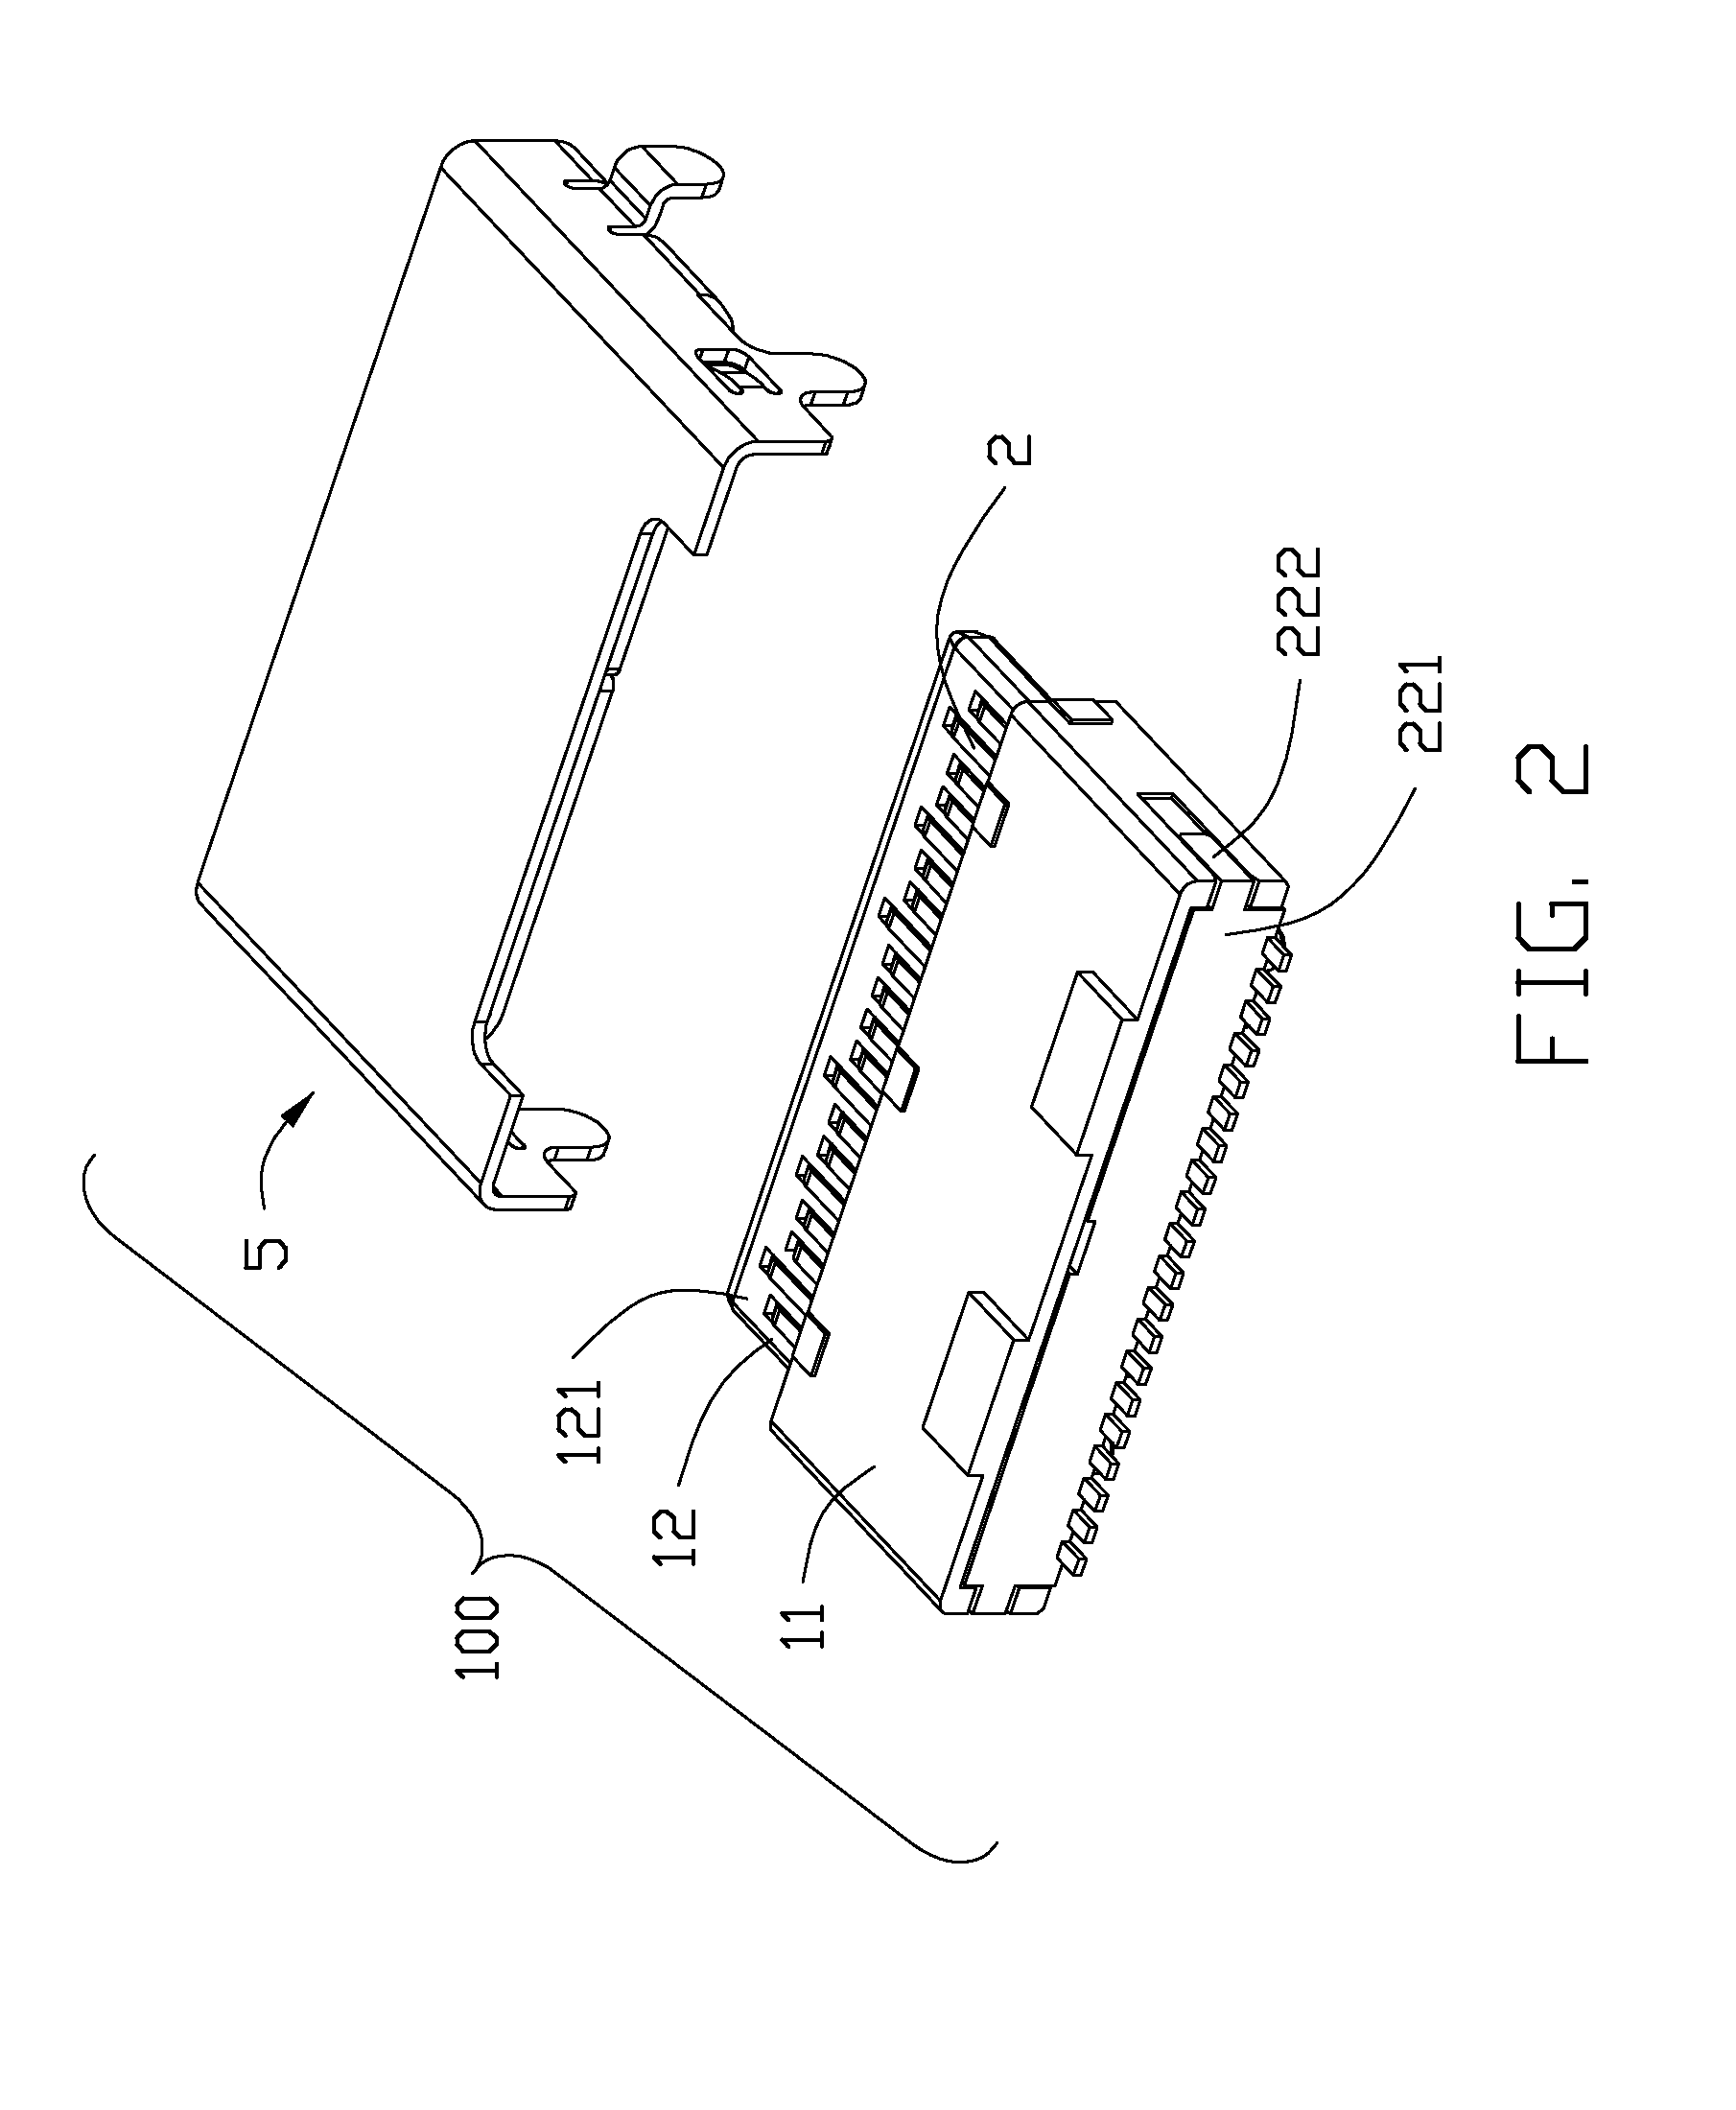 Electrical connector used for transmitting high frequency signals